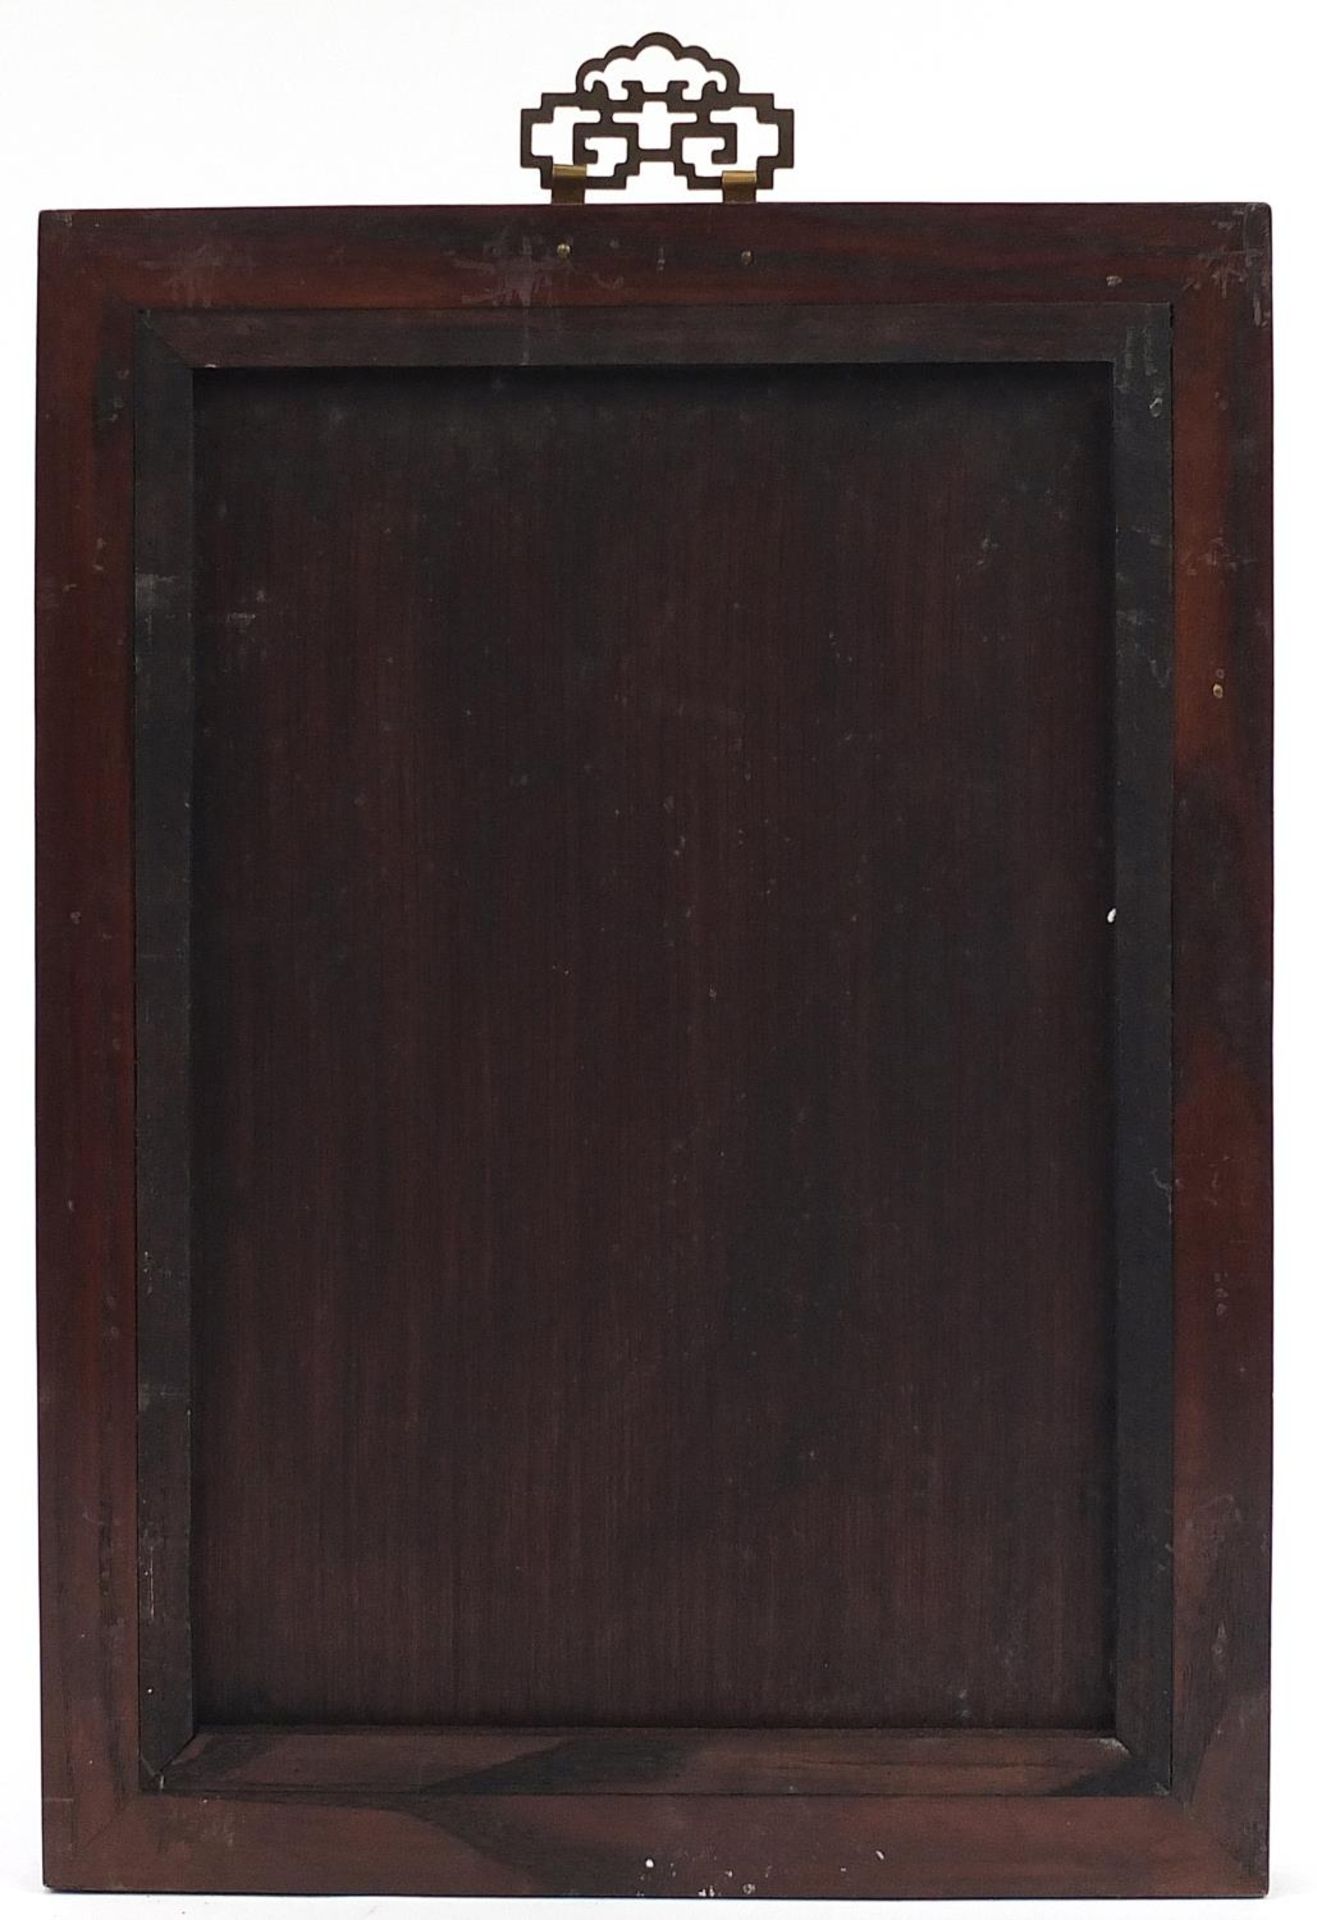 Chinese hardstone panel with hardwood frame and bronzed metal mounts, overall 48cm x 36cm - Image 4 of 4